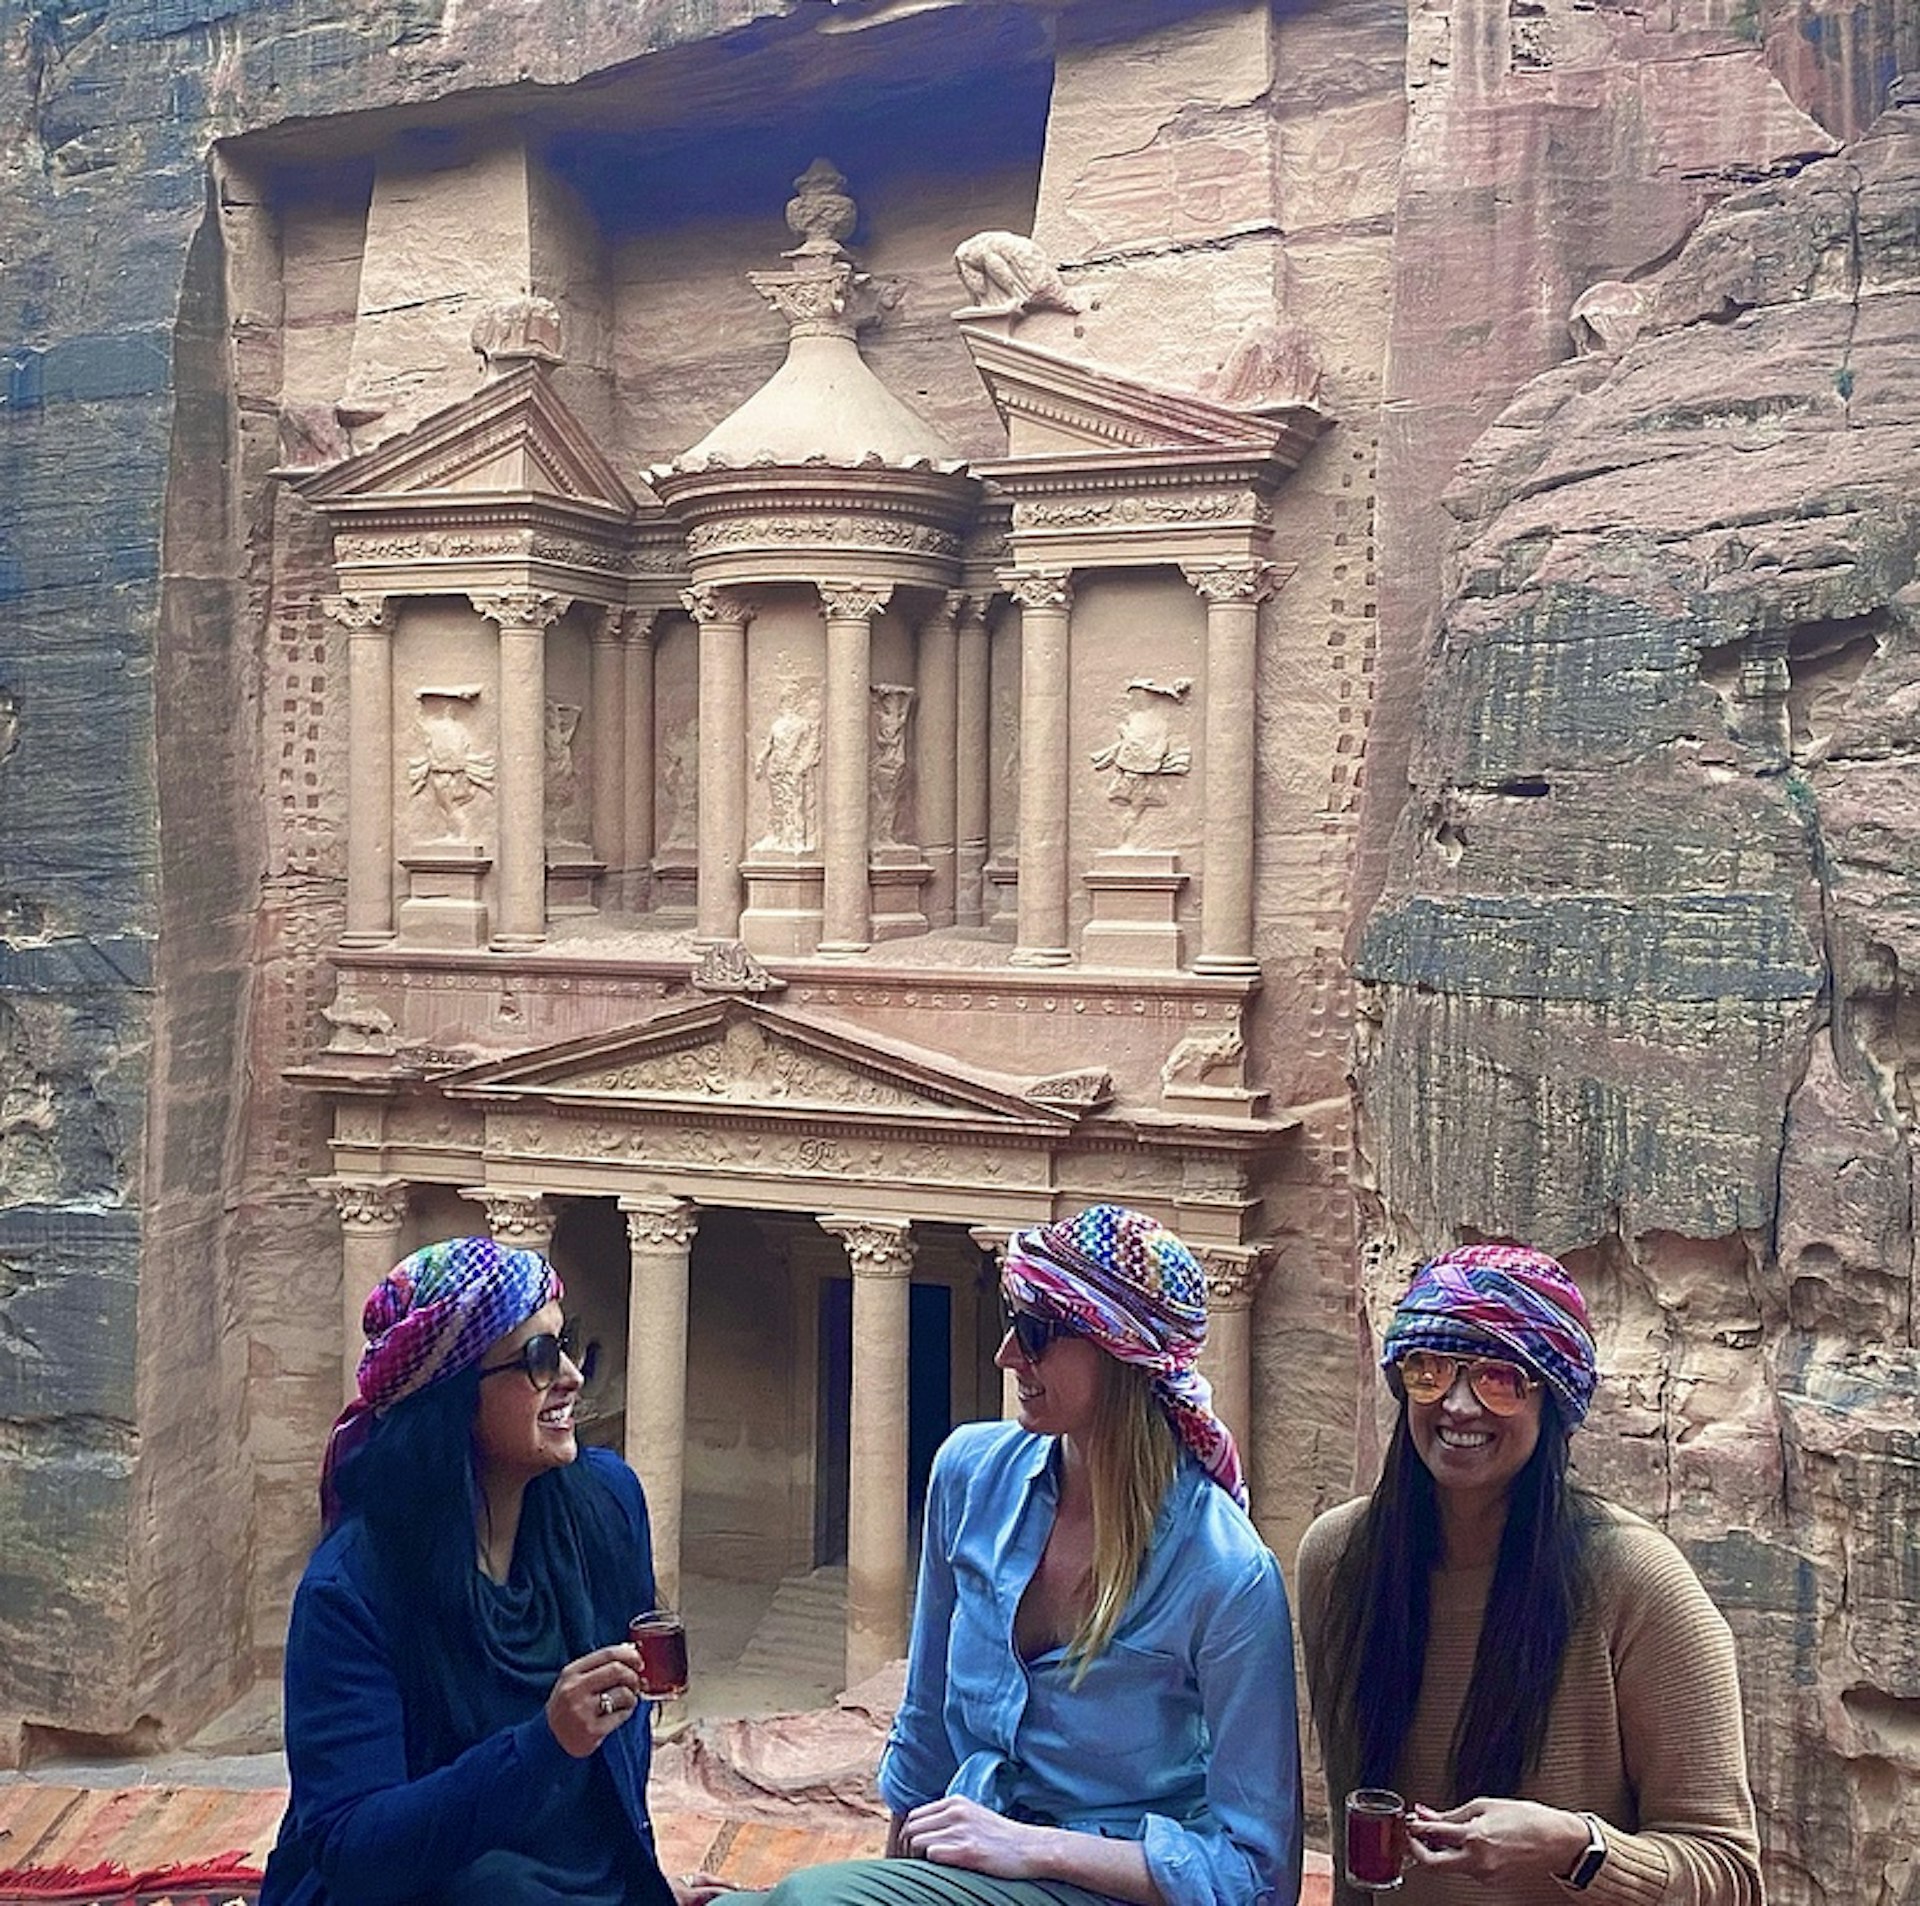 Aparna Shewakramani and friends in traditional Bedouin headscarves in Wadi Rum